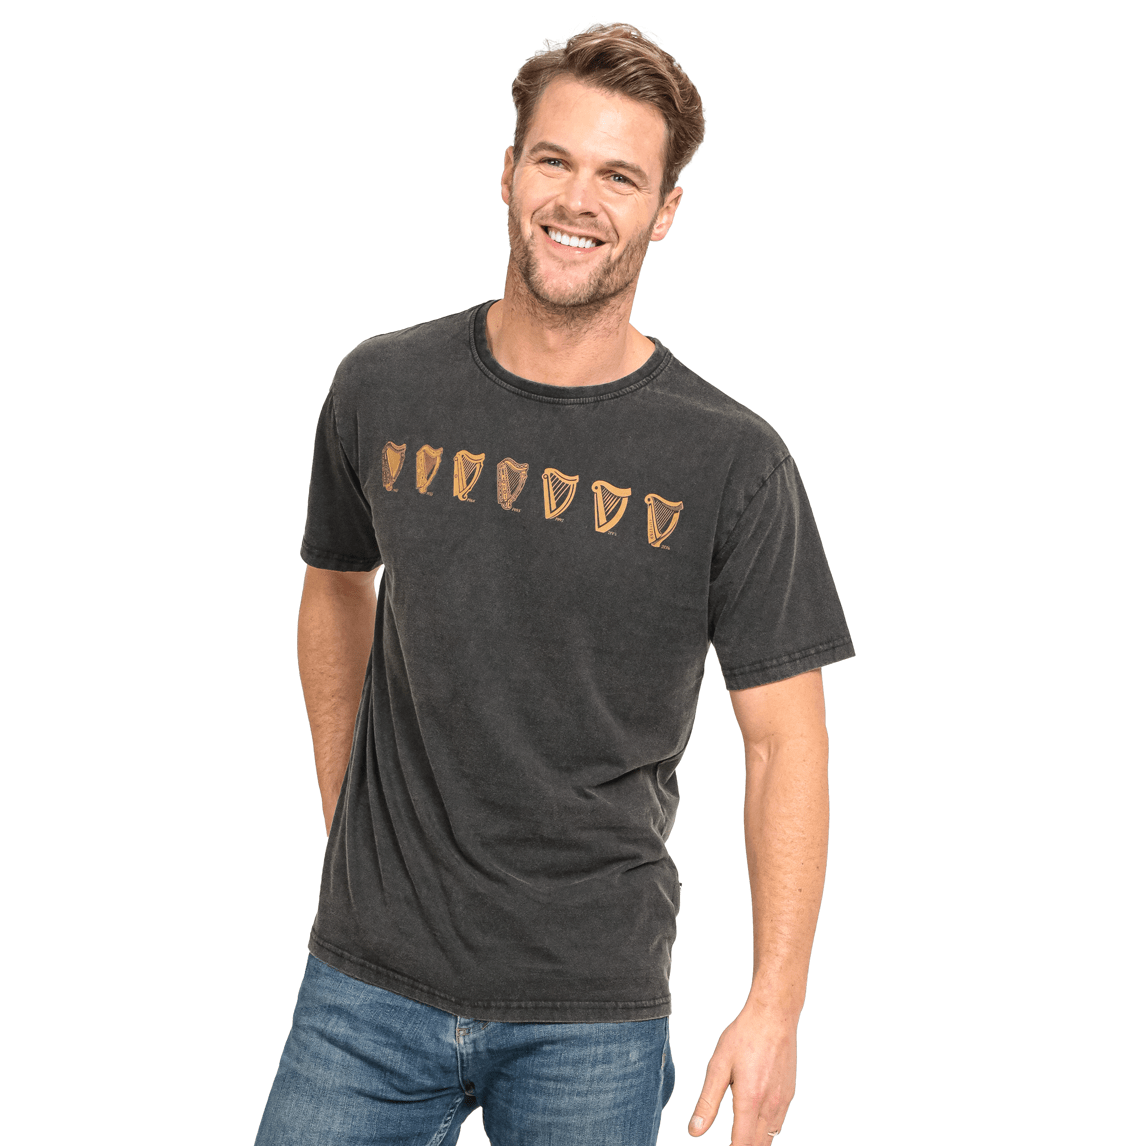 A man is smiling while wearing a black cotton t-shirt featuring the Guinness UK Evolution Harp Tee design.